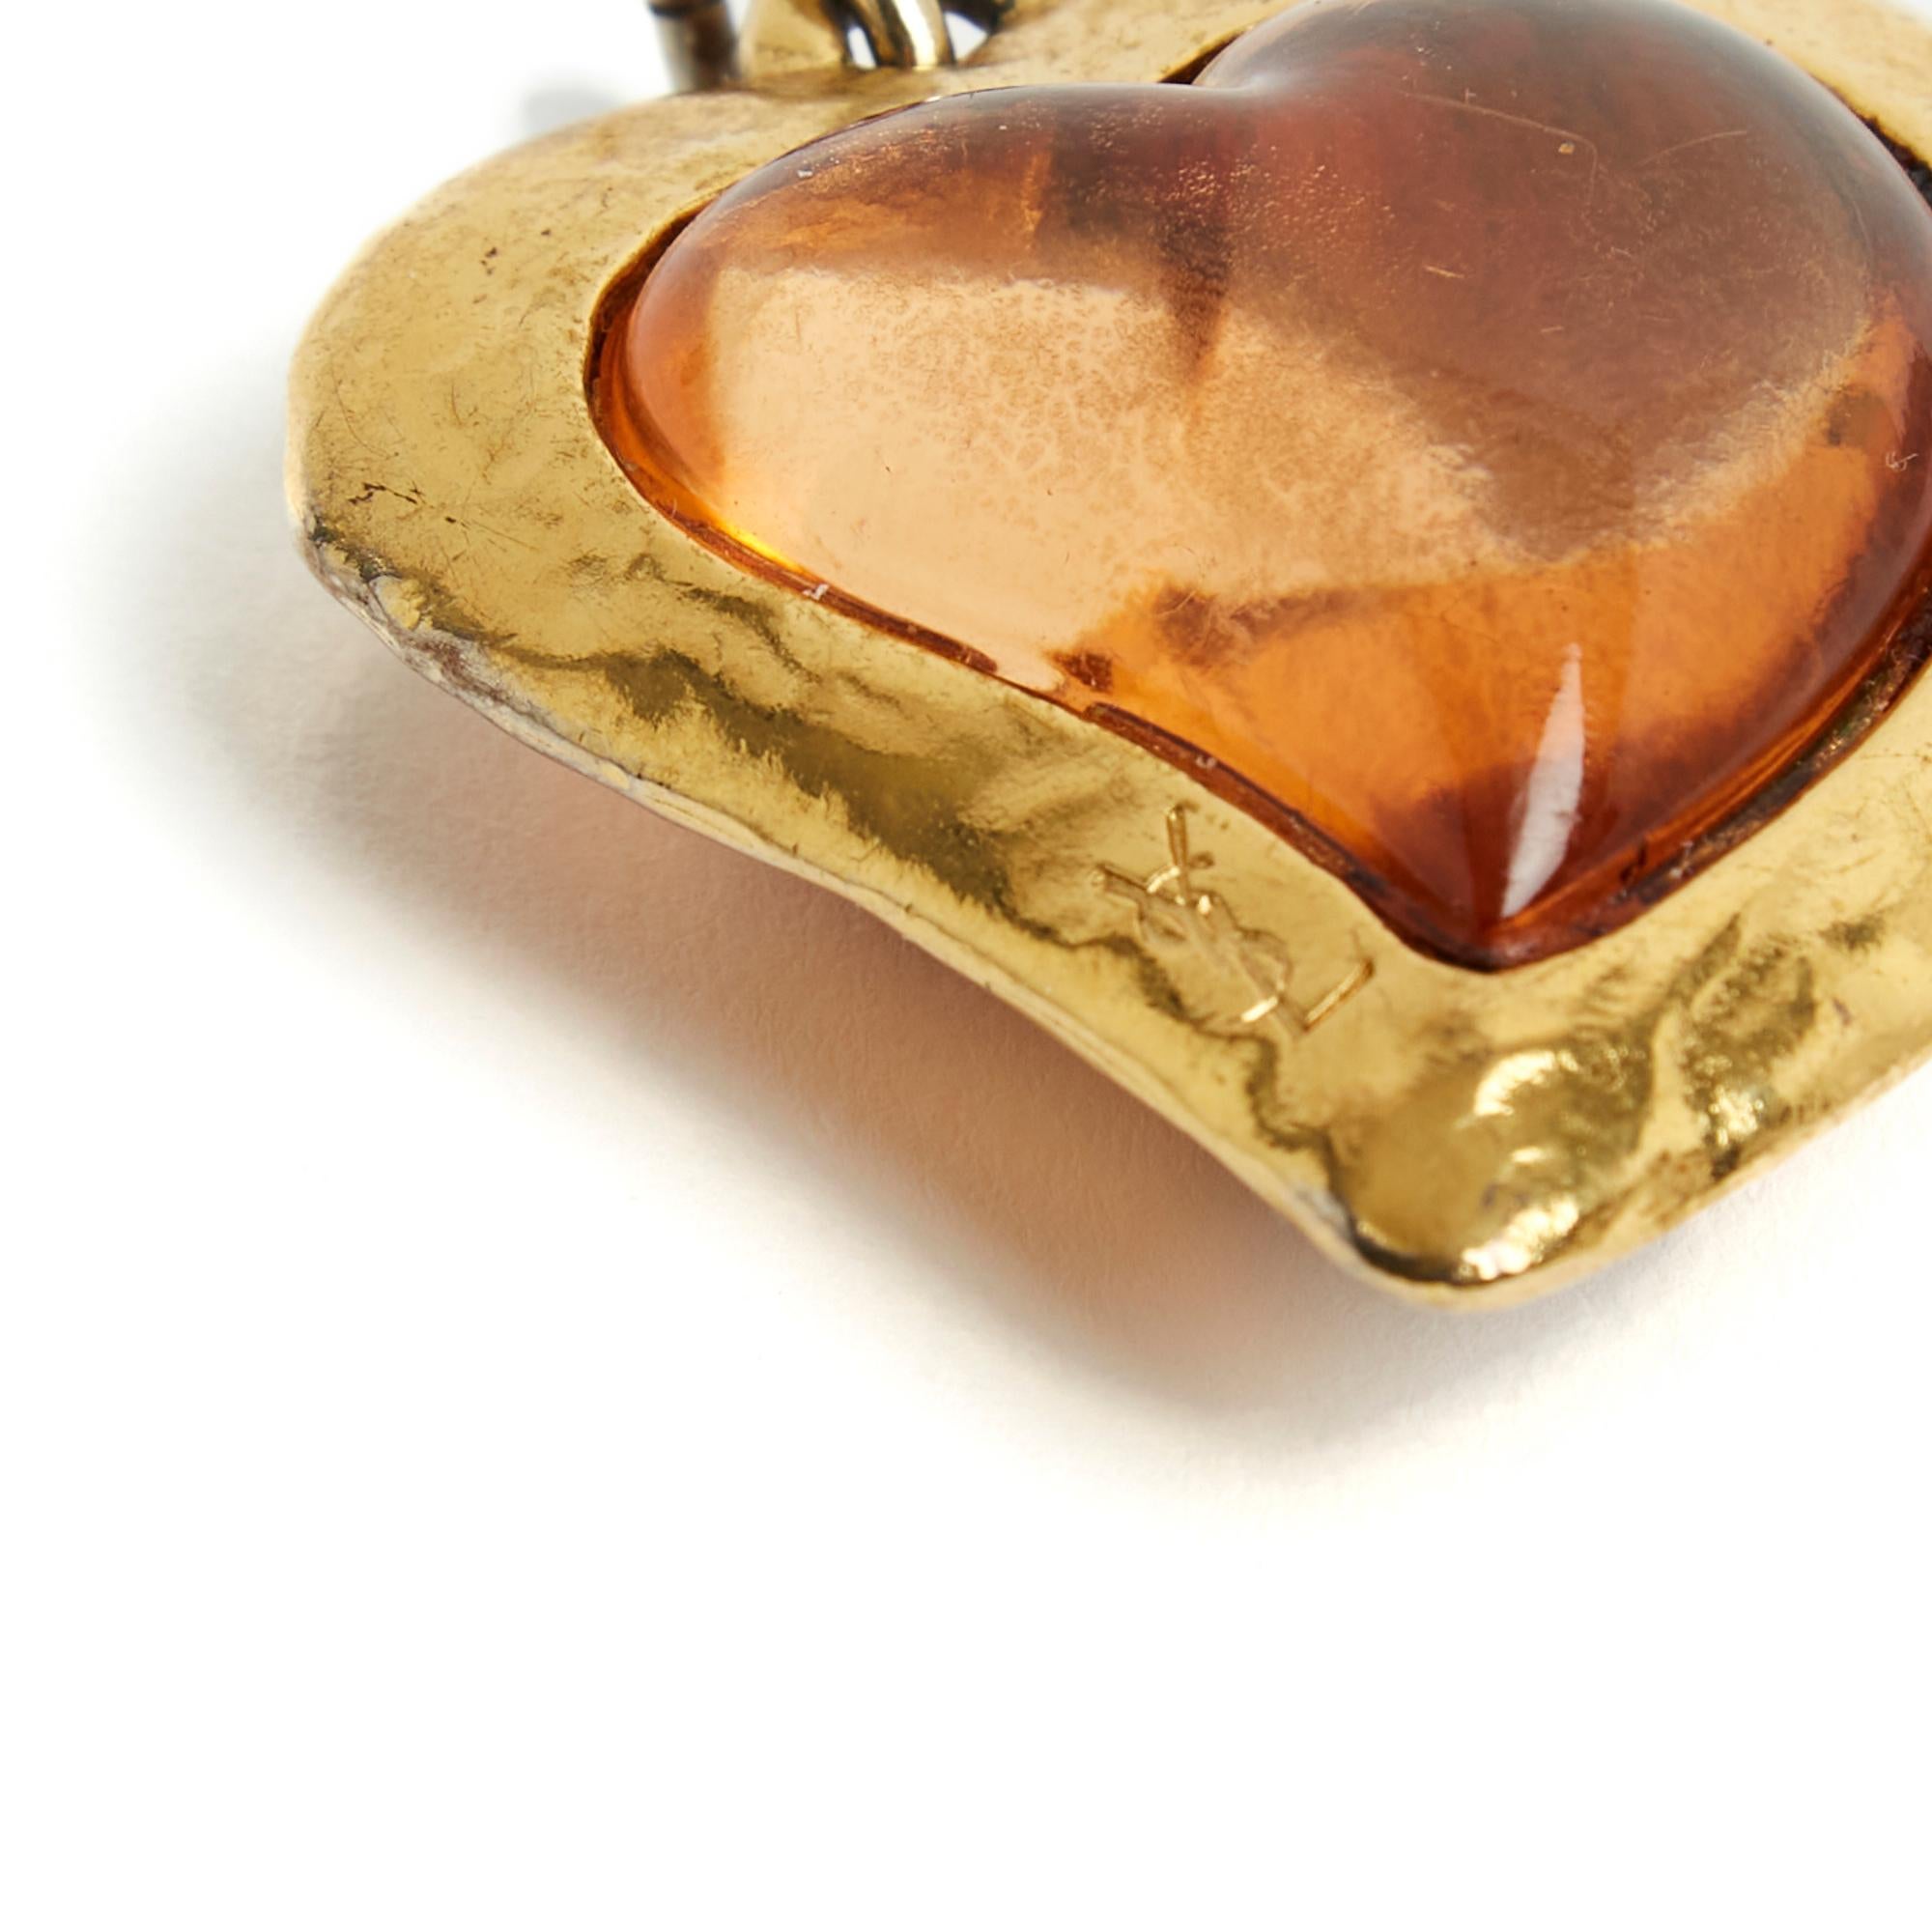 Yves Saint Laurent pendant with the motif of a heart in amber-colored resin surrounded by gold metal with the Yves Saint Laurent logo, bail for chain or cord. Width 4 cm x height 4.5 cm. The heart is very vintage but it is charming, delivered on a